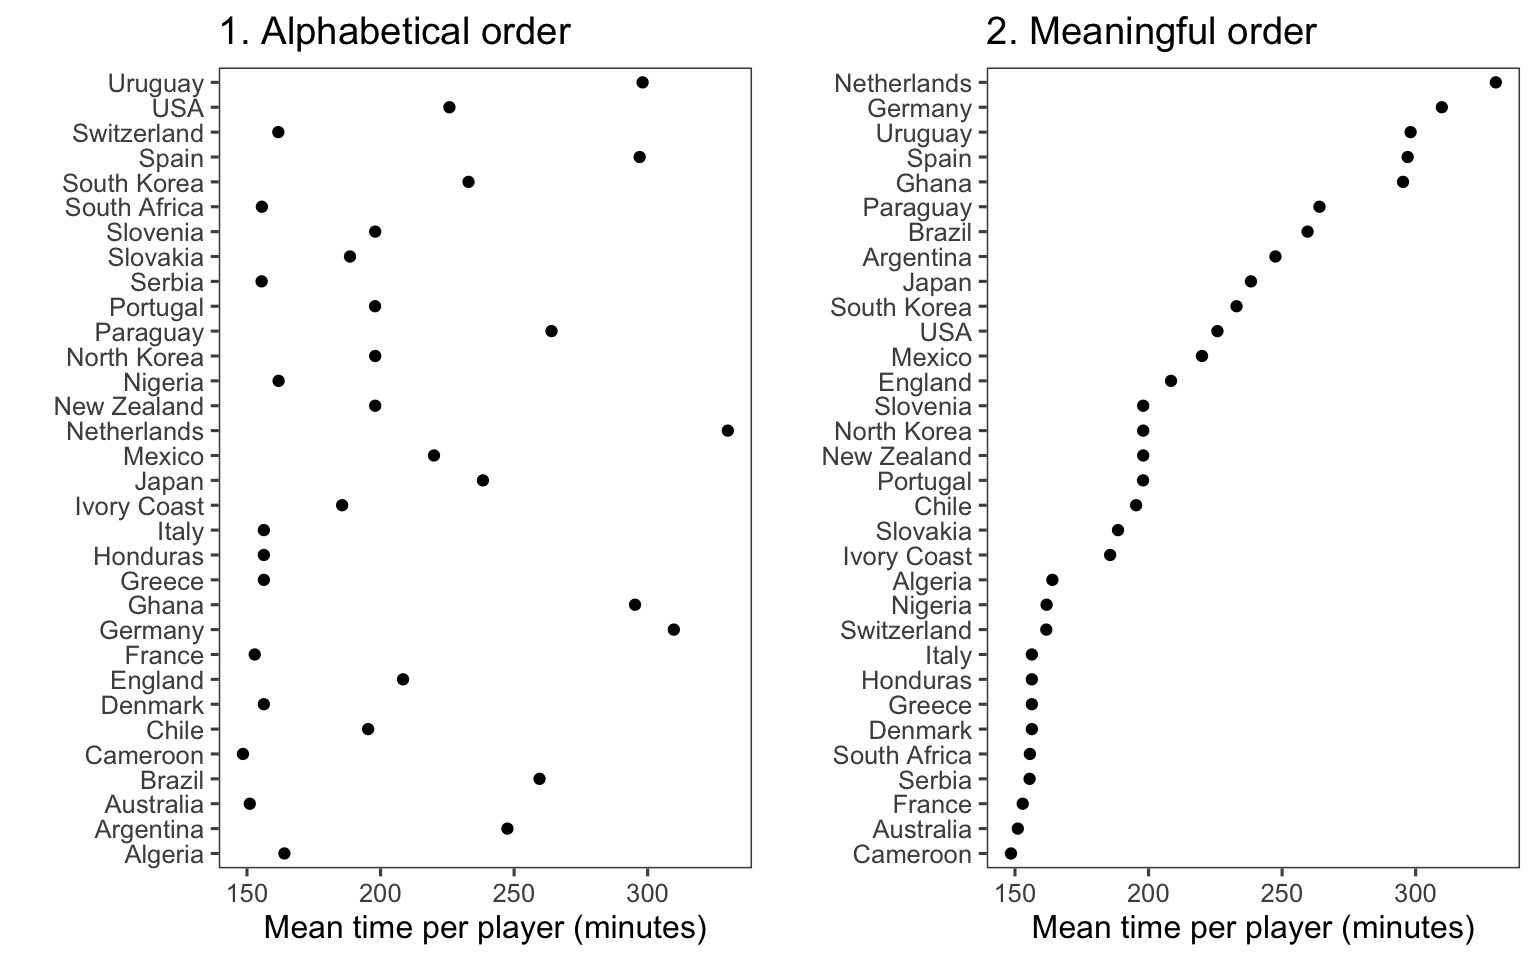 Mean time per player in World Cup 2010 by team. The plot on the right has reordered teams to show patterns more clearly.